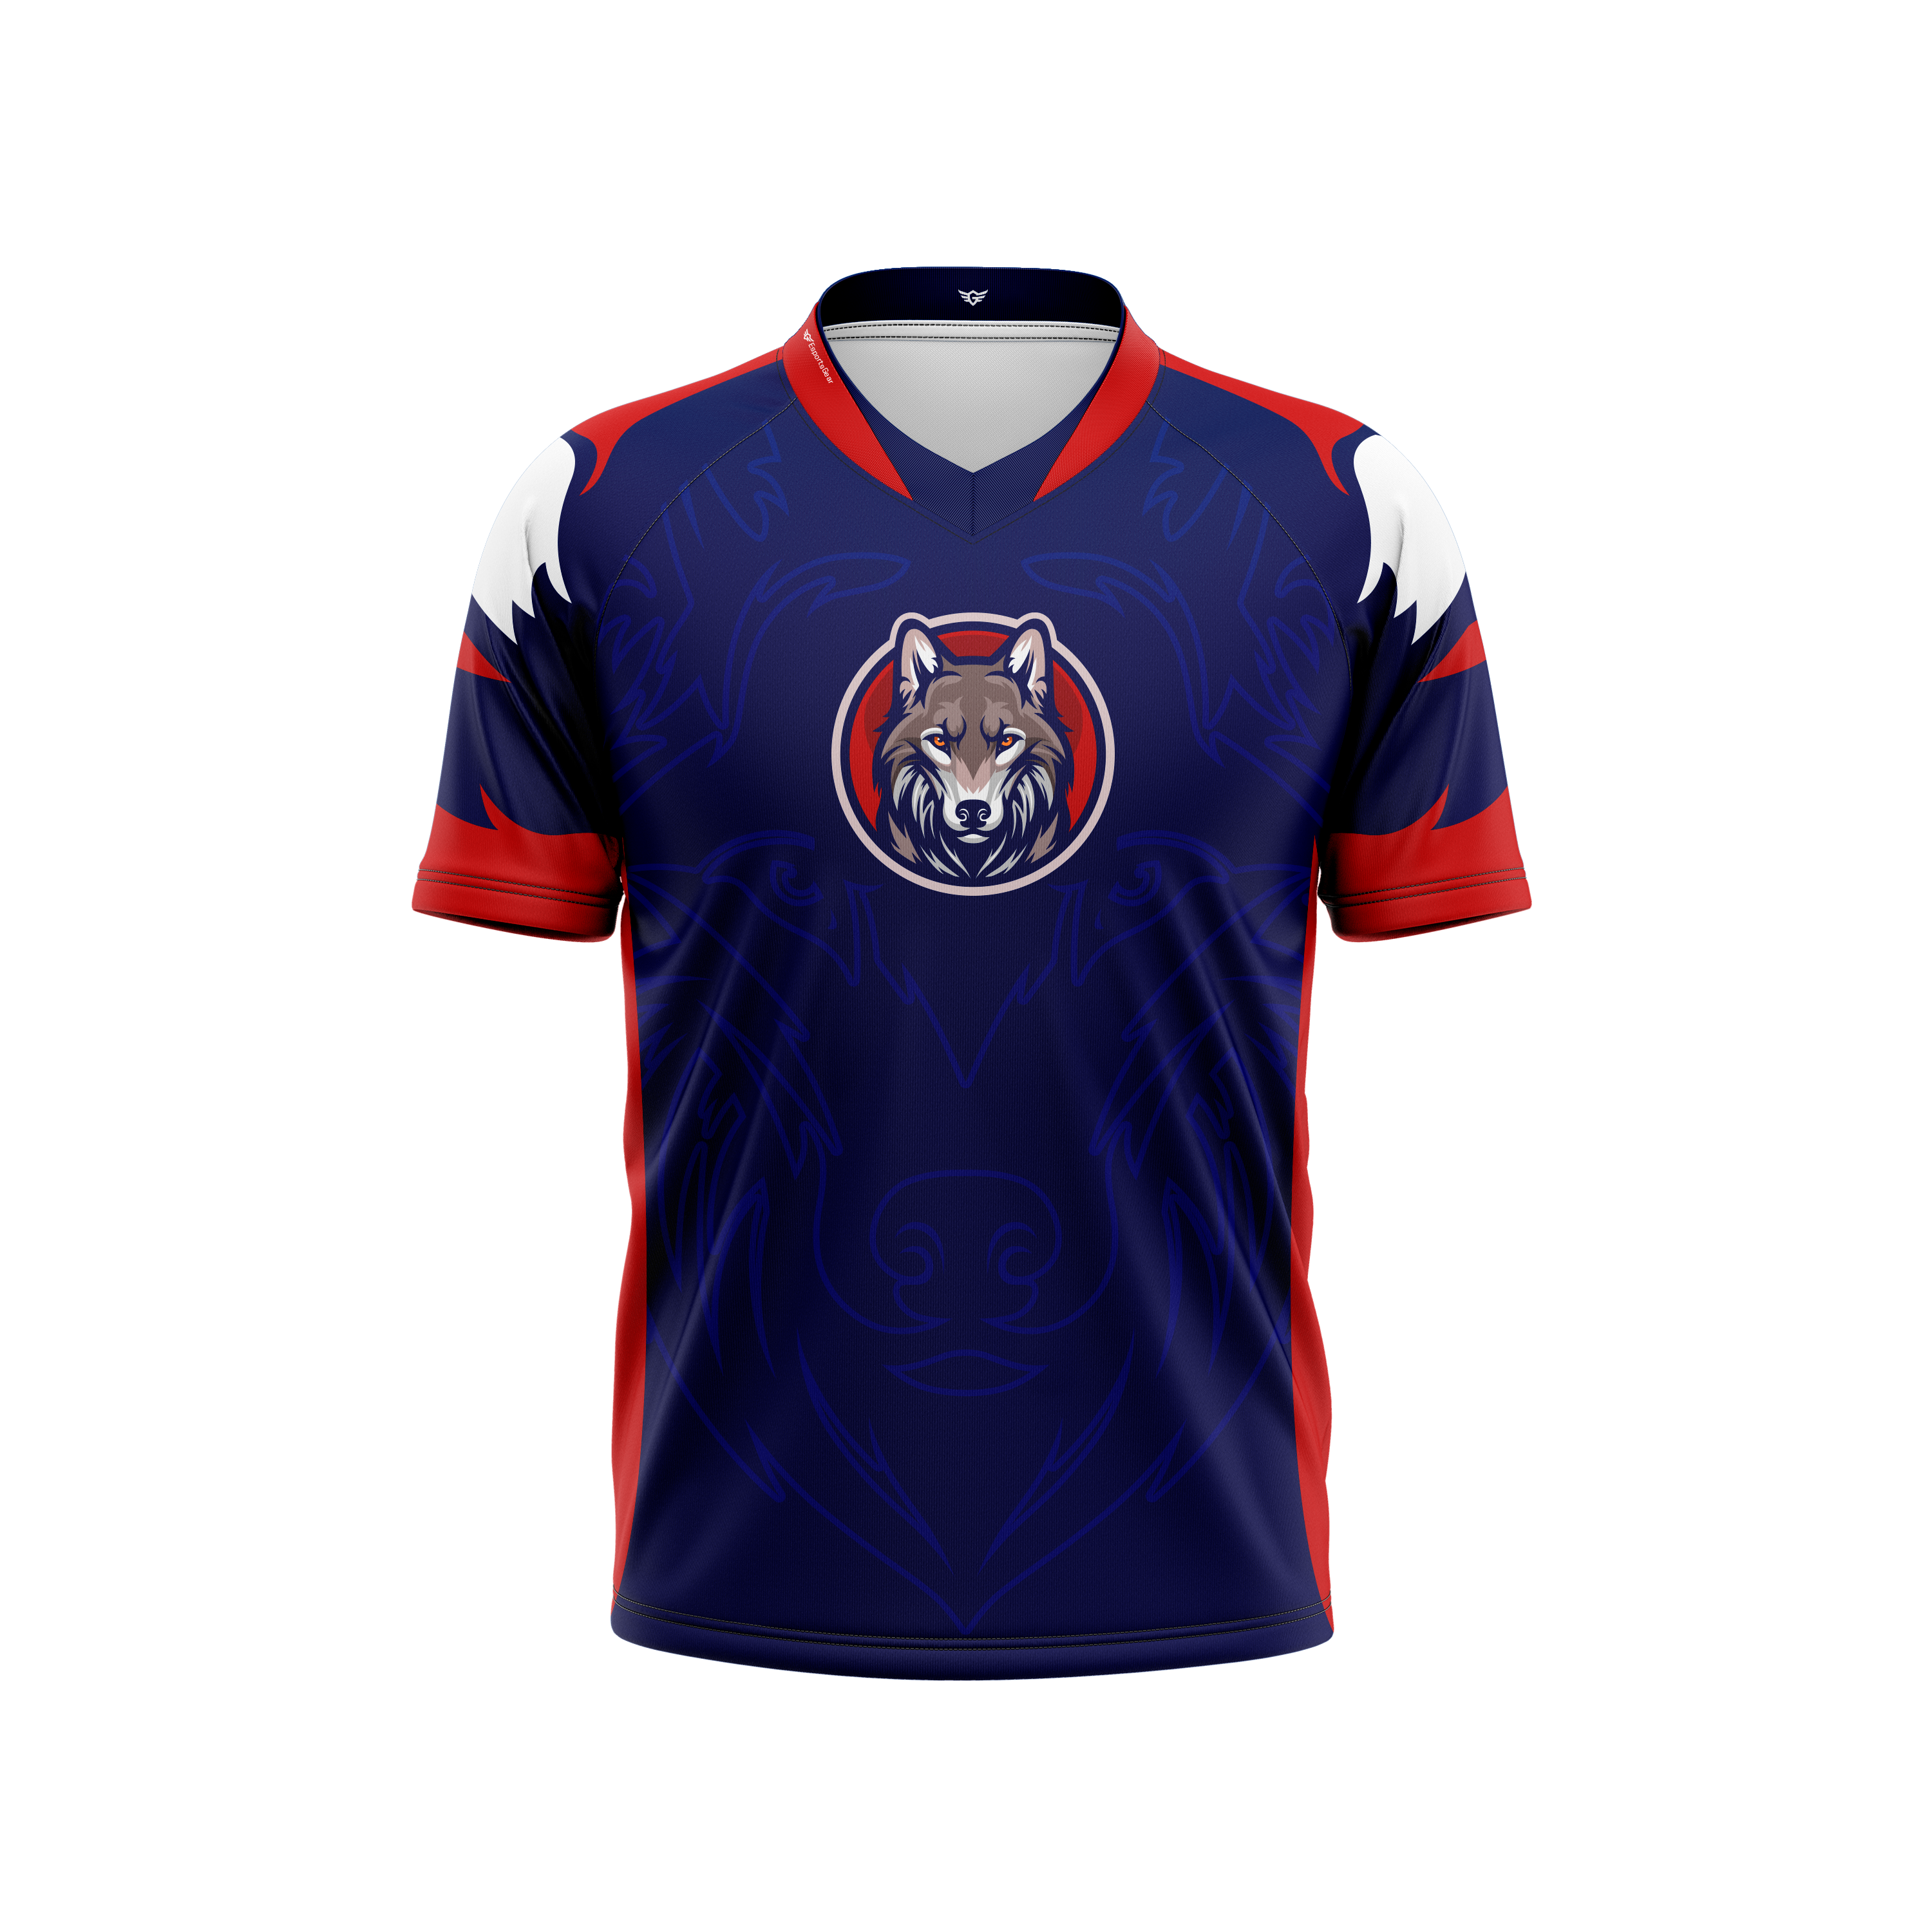 Ranch View Esports Jersey